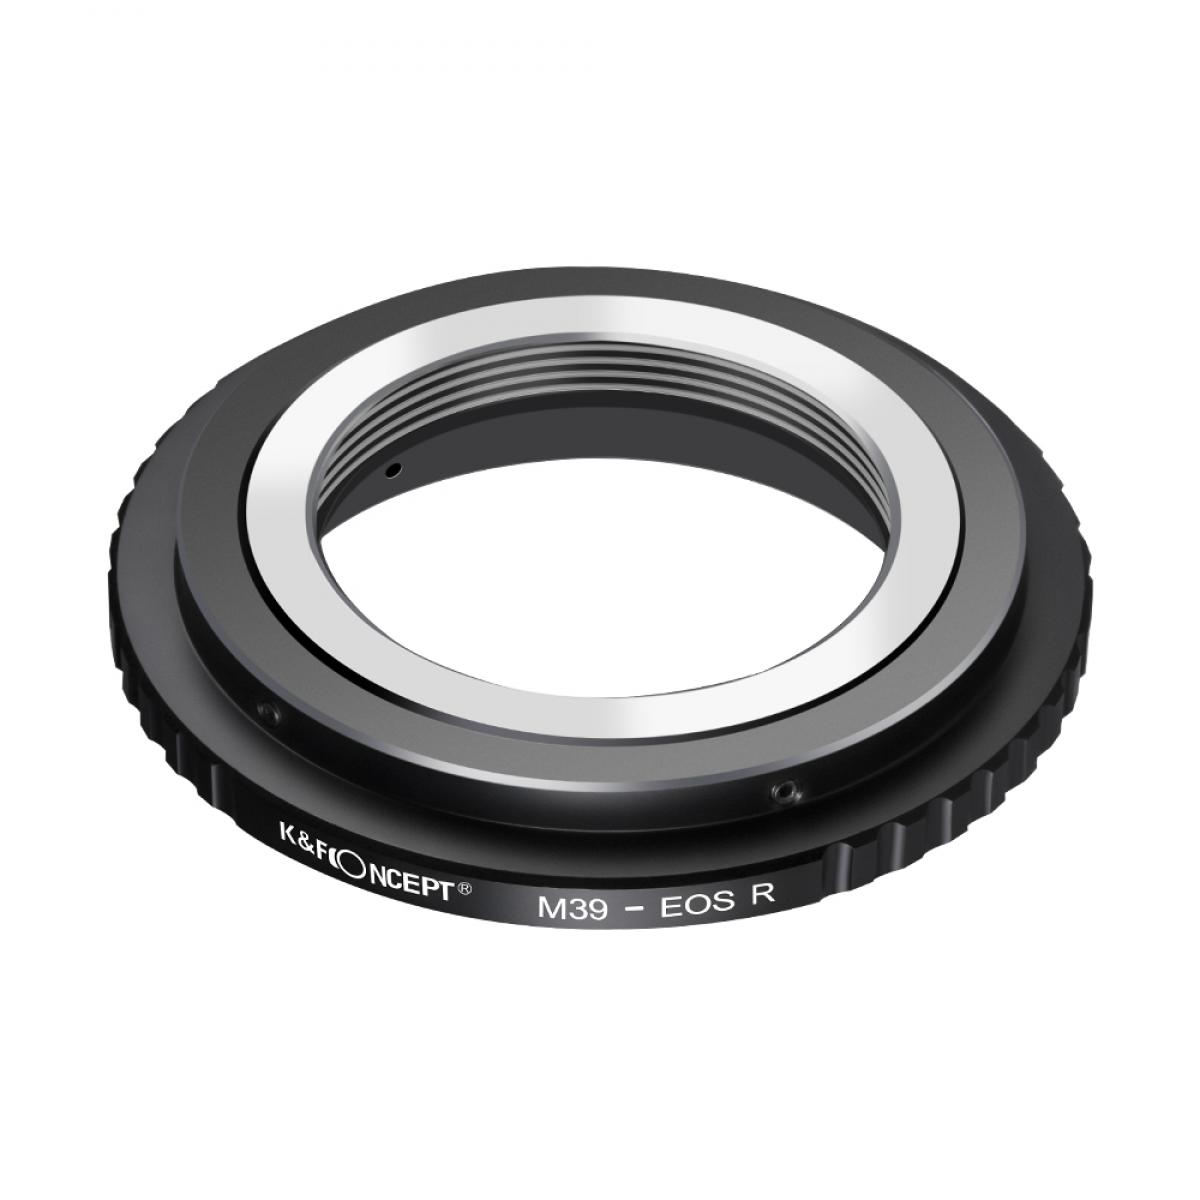 M39 Lenses to Canon RF Lens Mount Adapter K&F Concept M19194 Lens Adapter